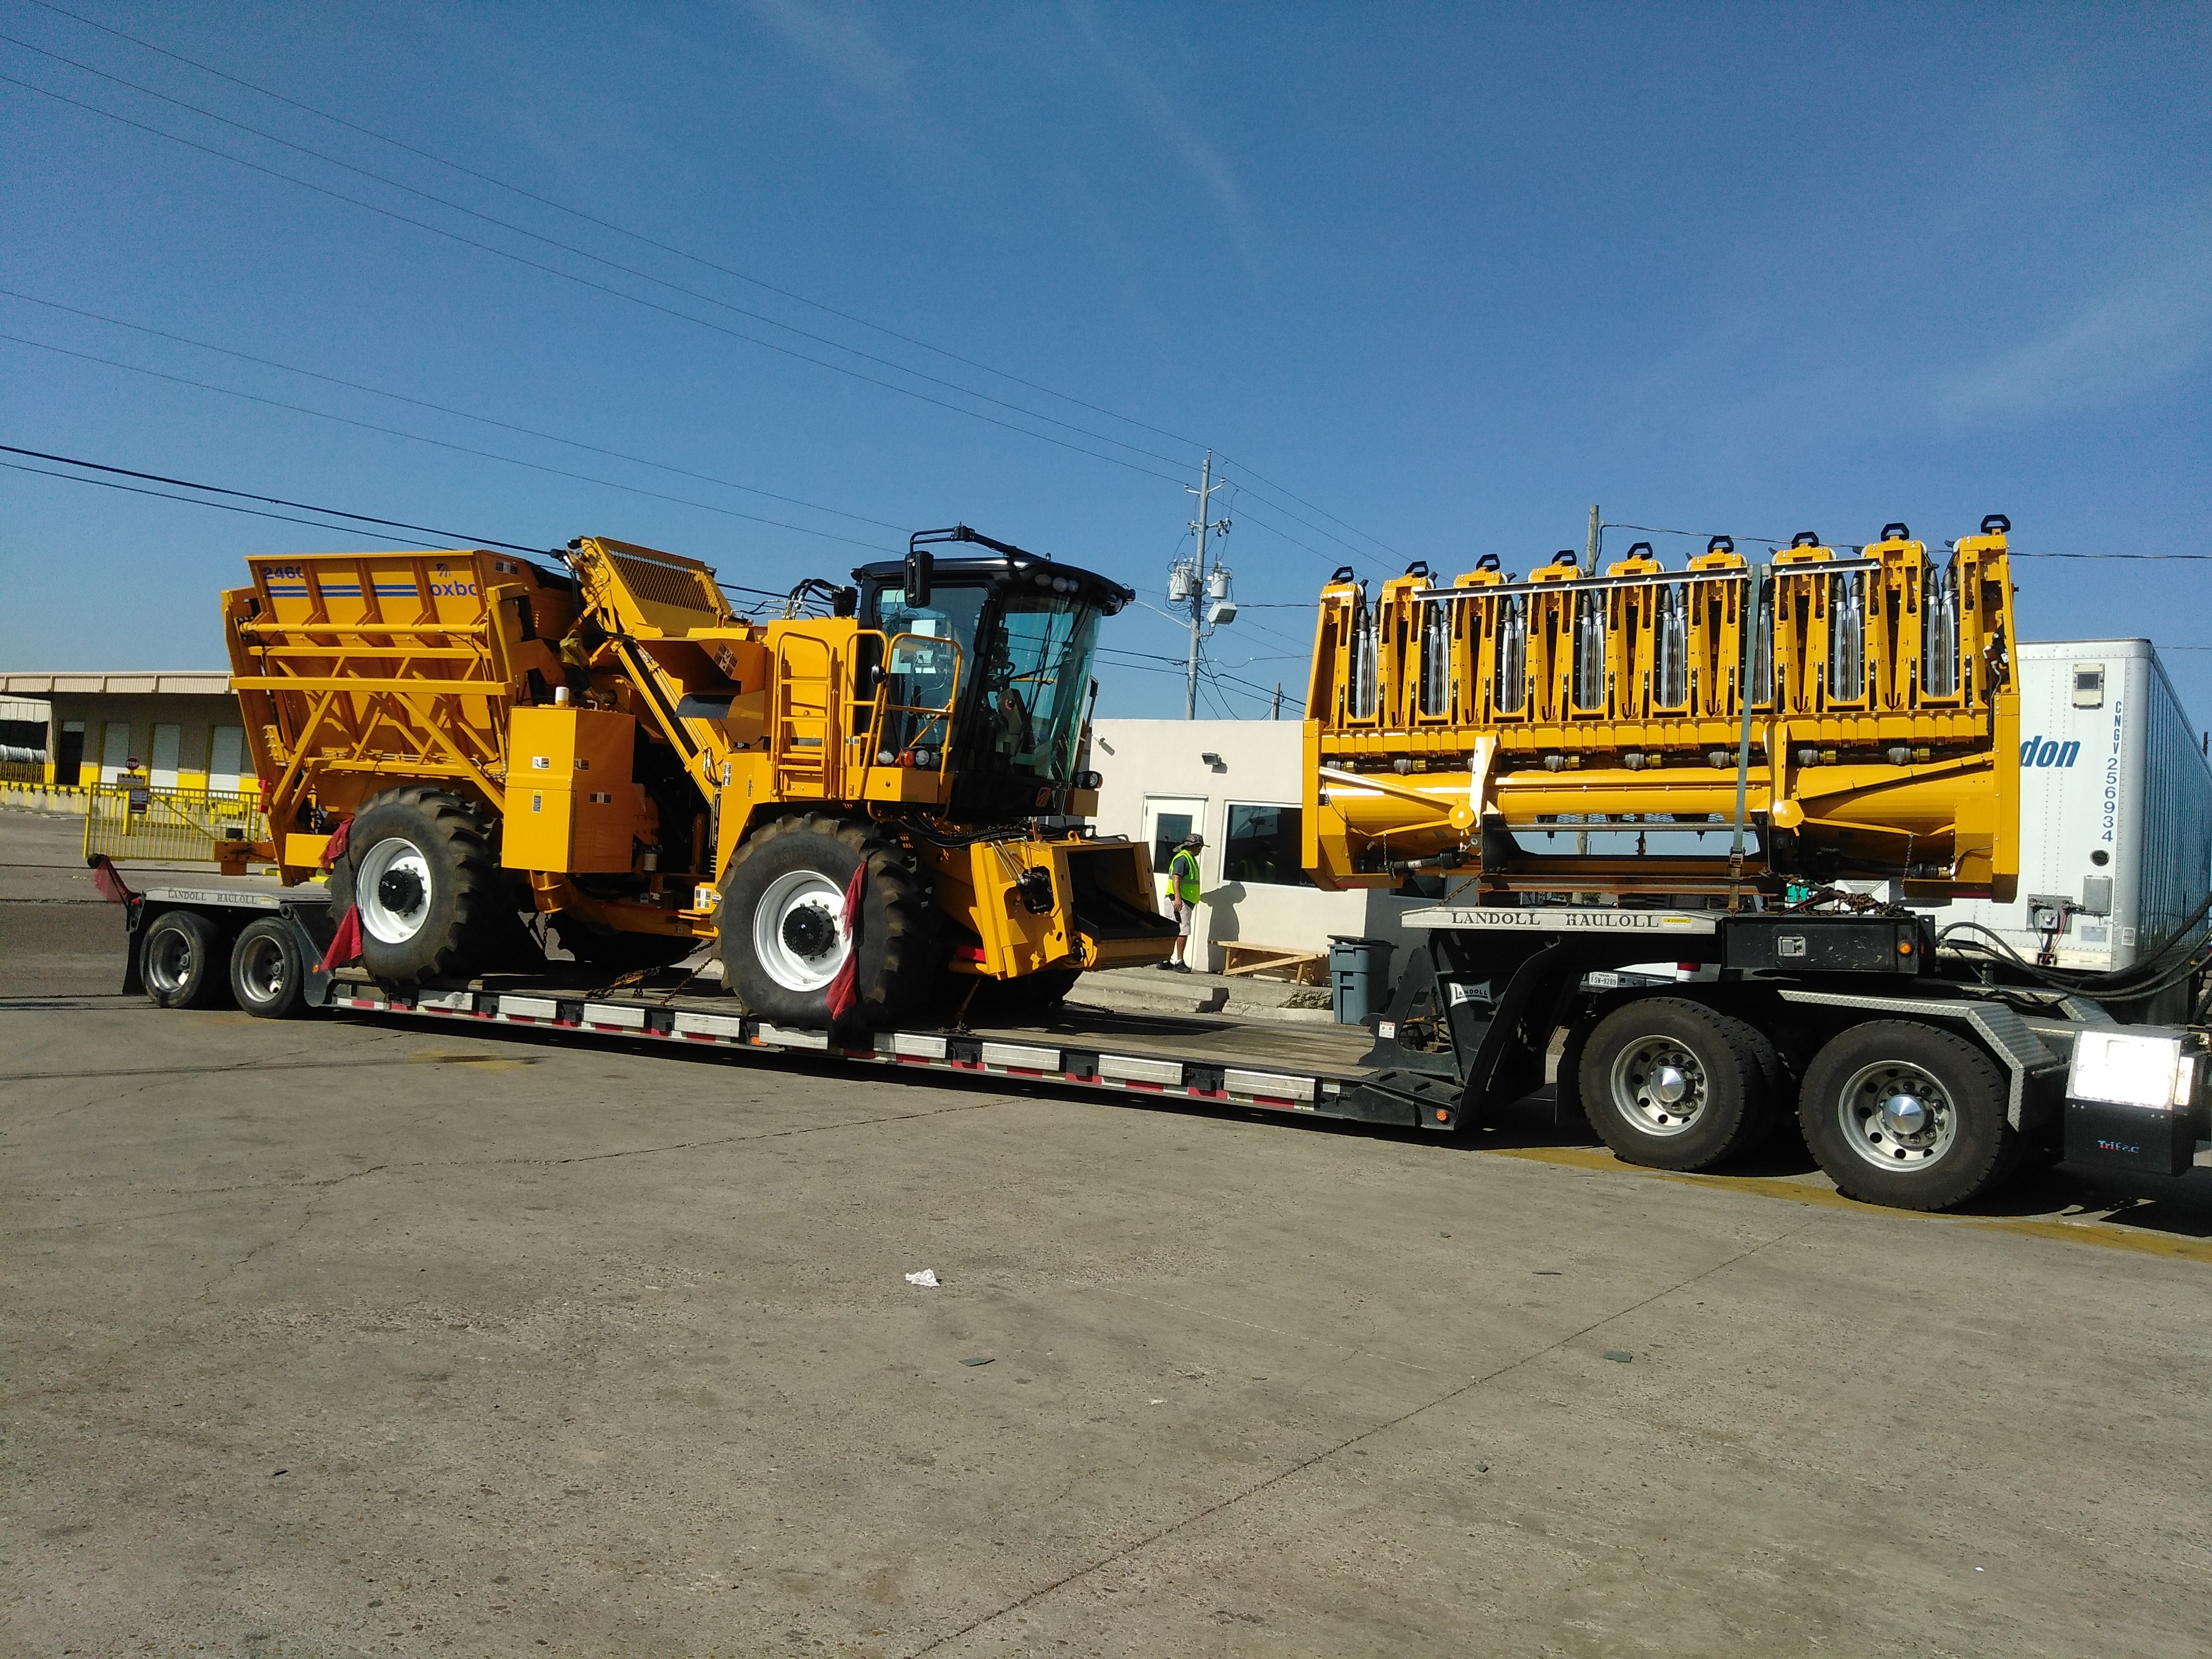 Being a load with a high center of gravity, the mobile machinery is transported on a low height truck